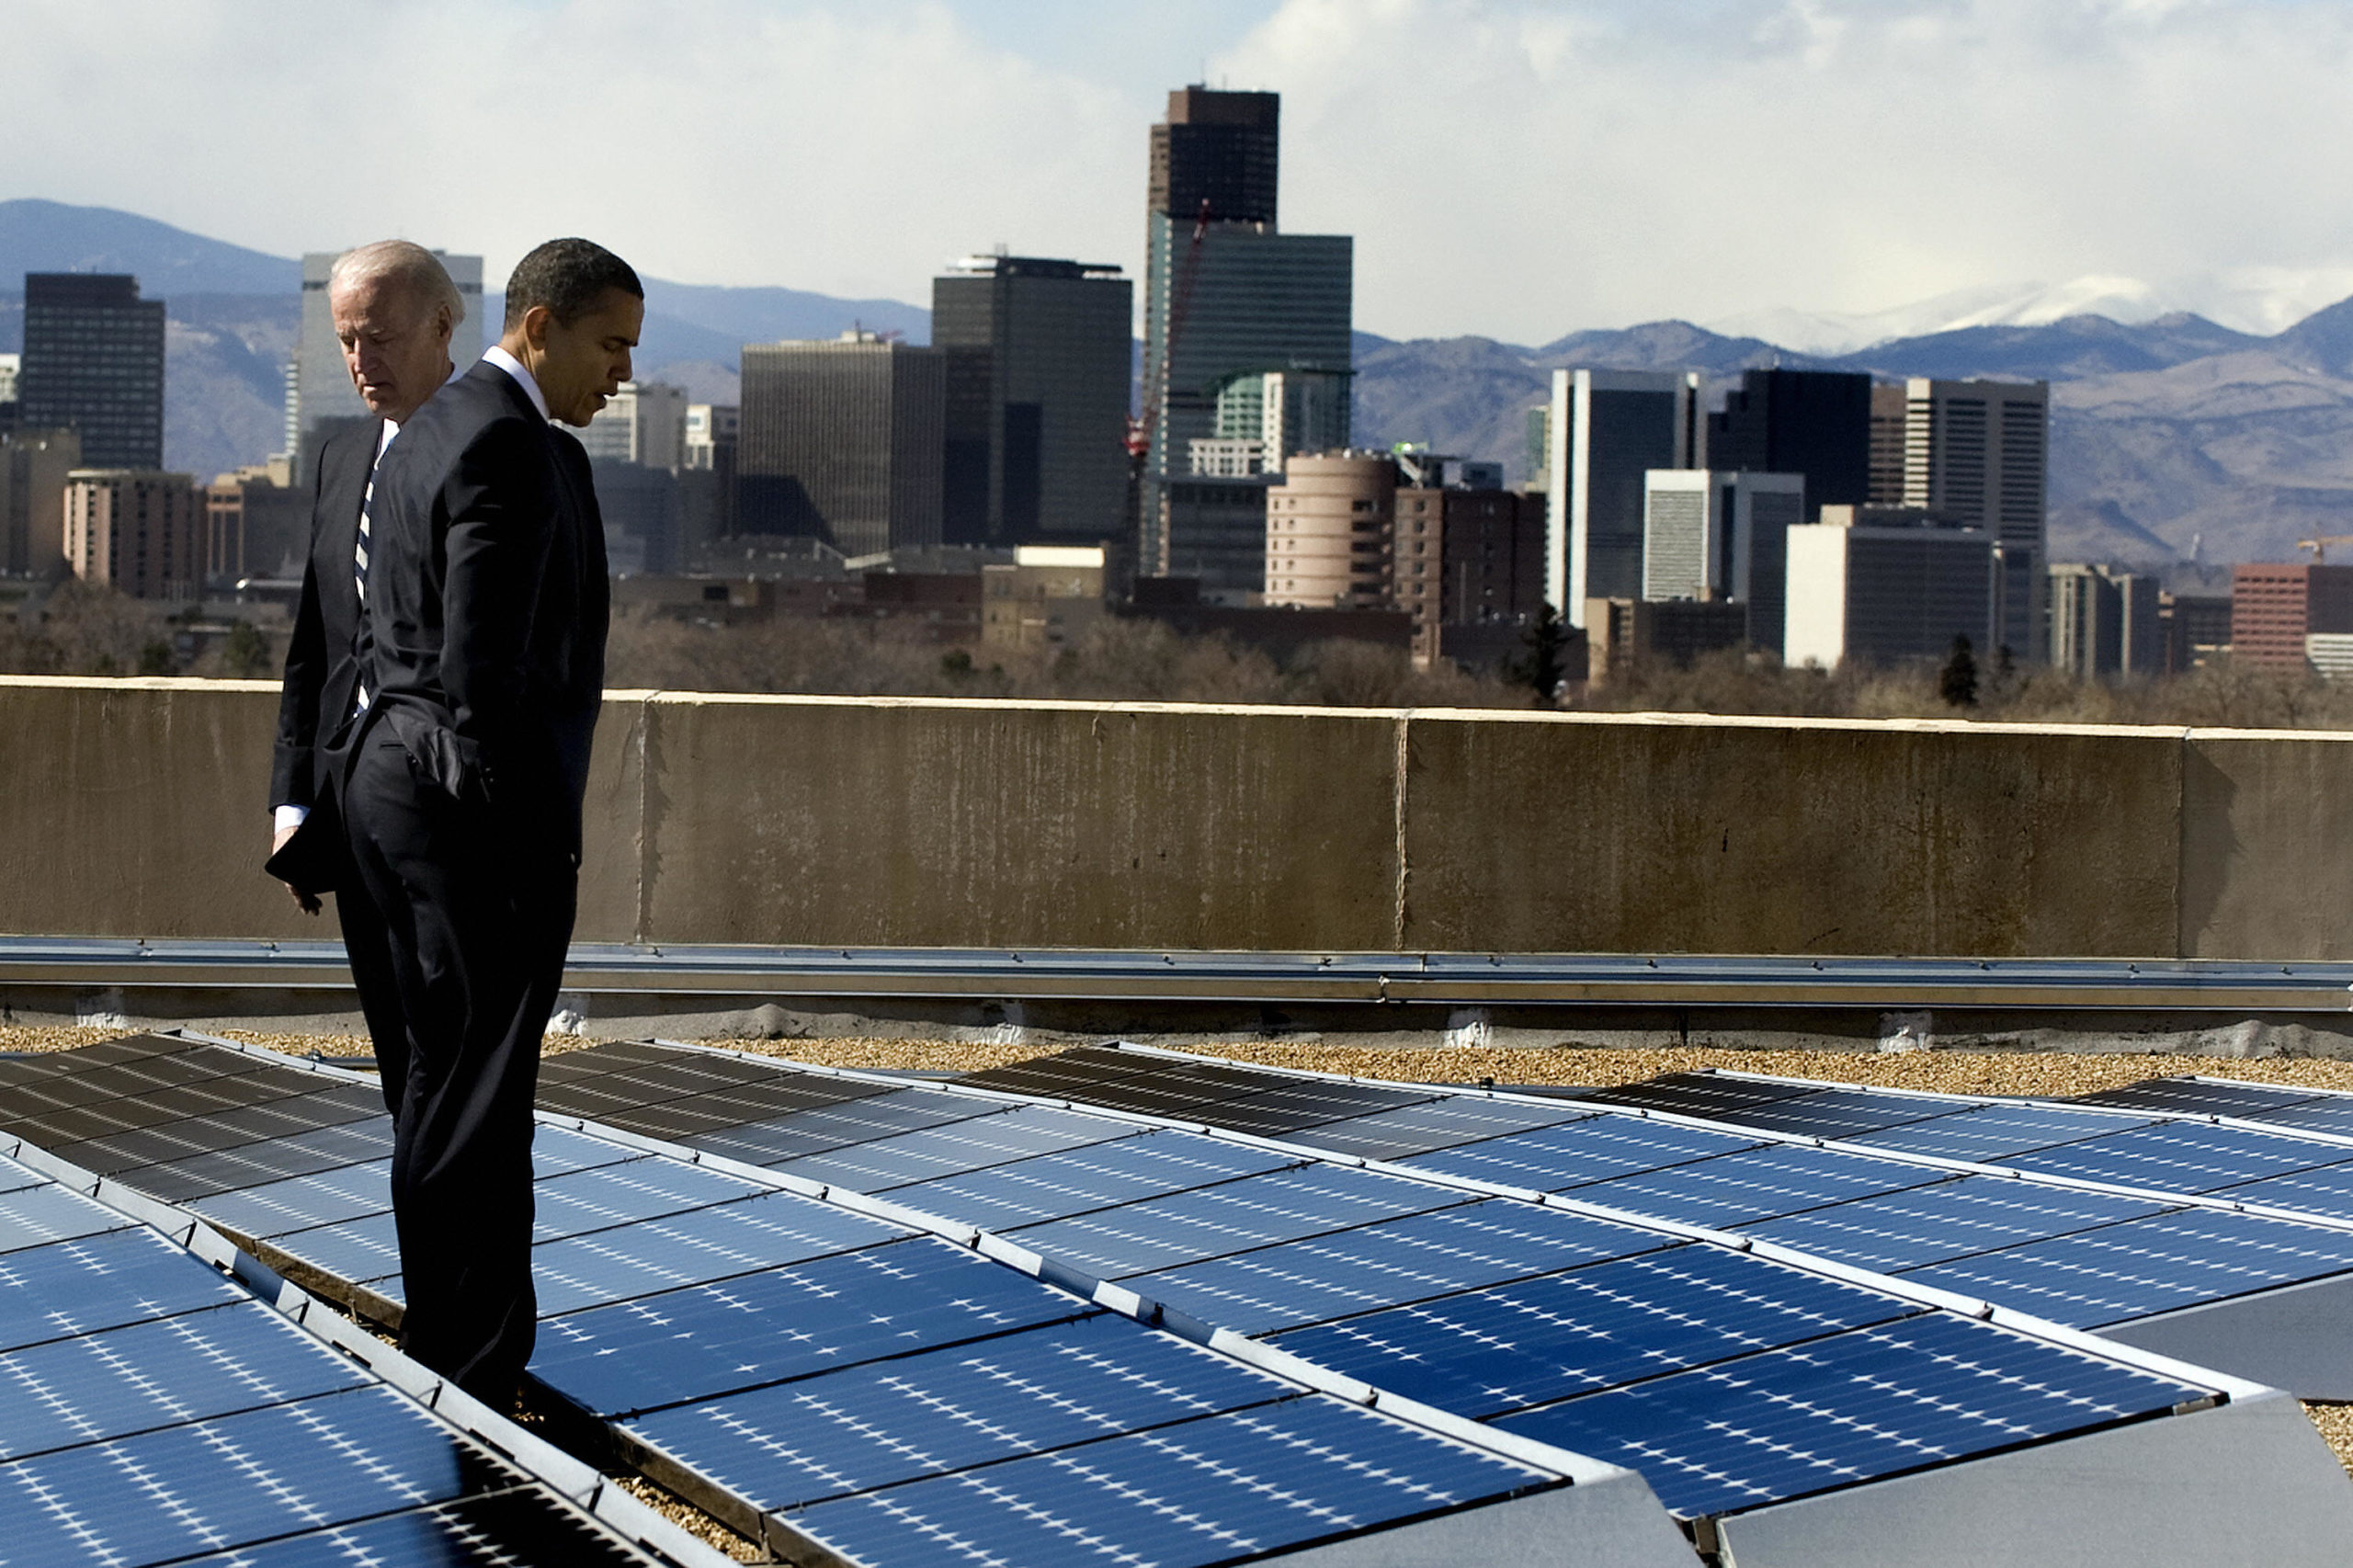 Former President Barack Obama and then-Vice President Joe Biden look at solar panels at the Denver Museum of Nature and Science in Denver, Colorado, on Feb. 17, 2009. (Jim Watson/AFP via Getty Images)